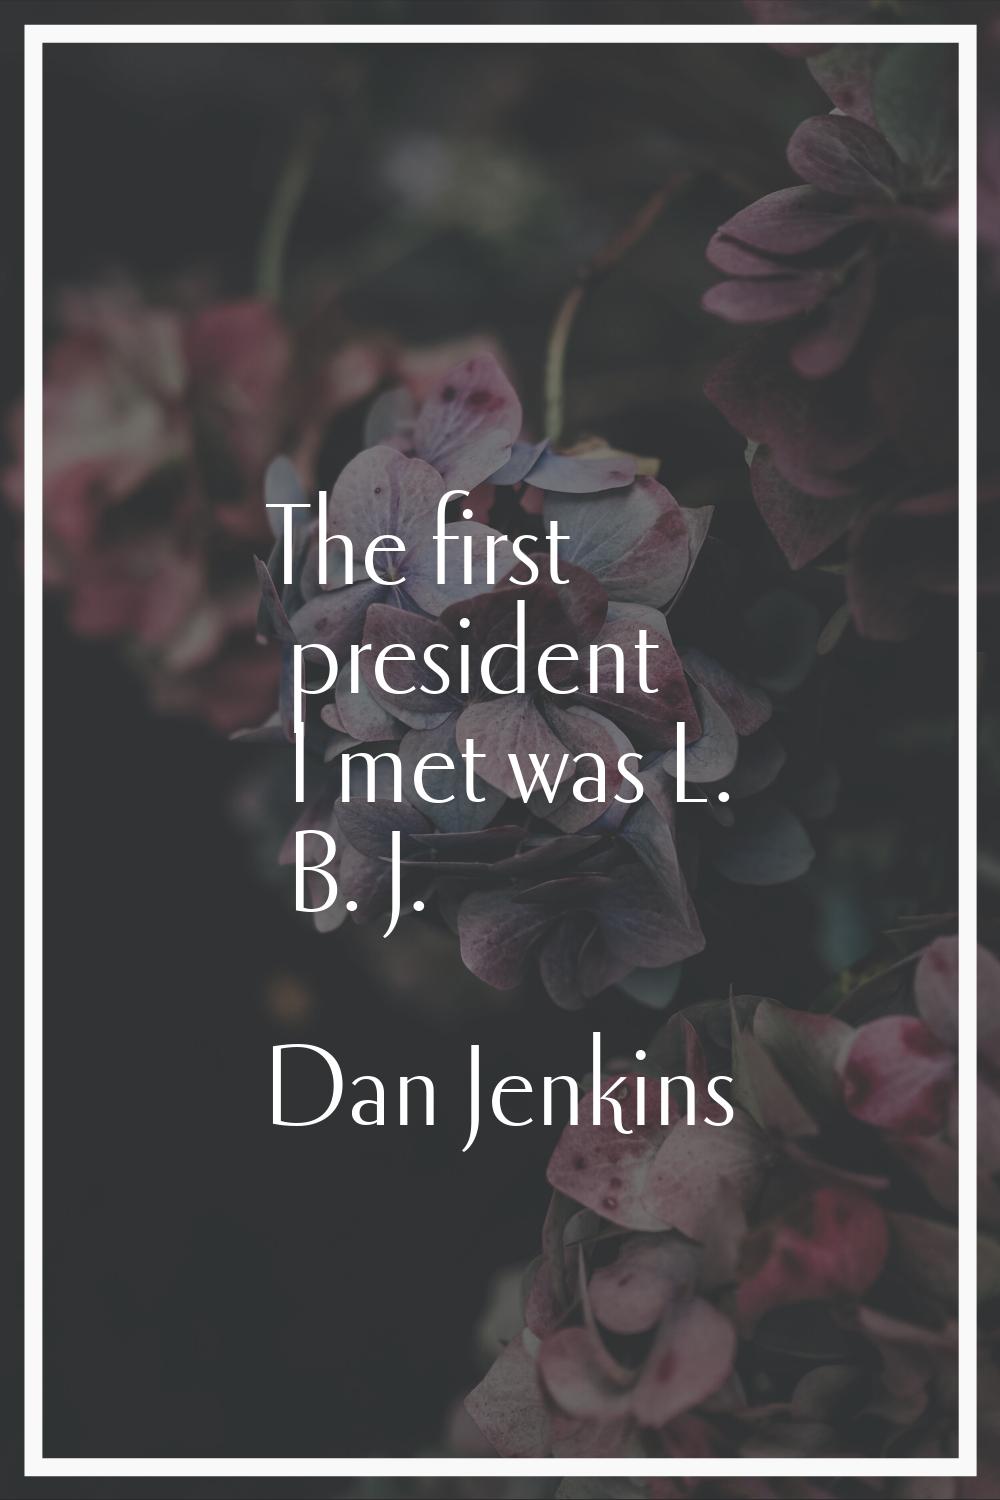 The first president I met was L. B. J.